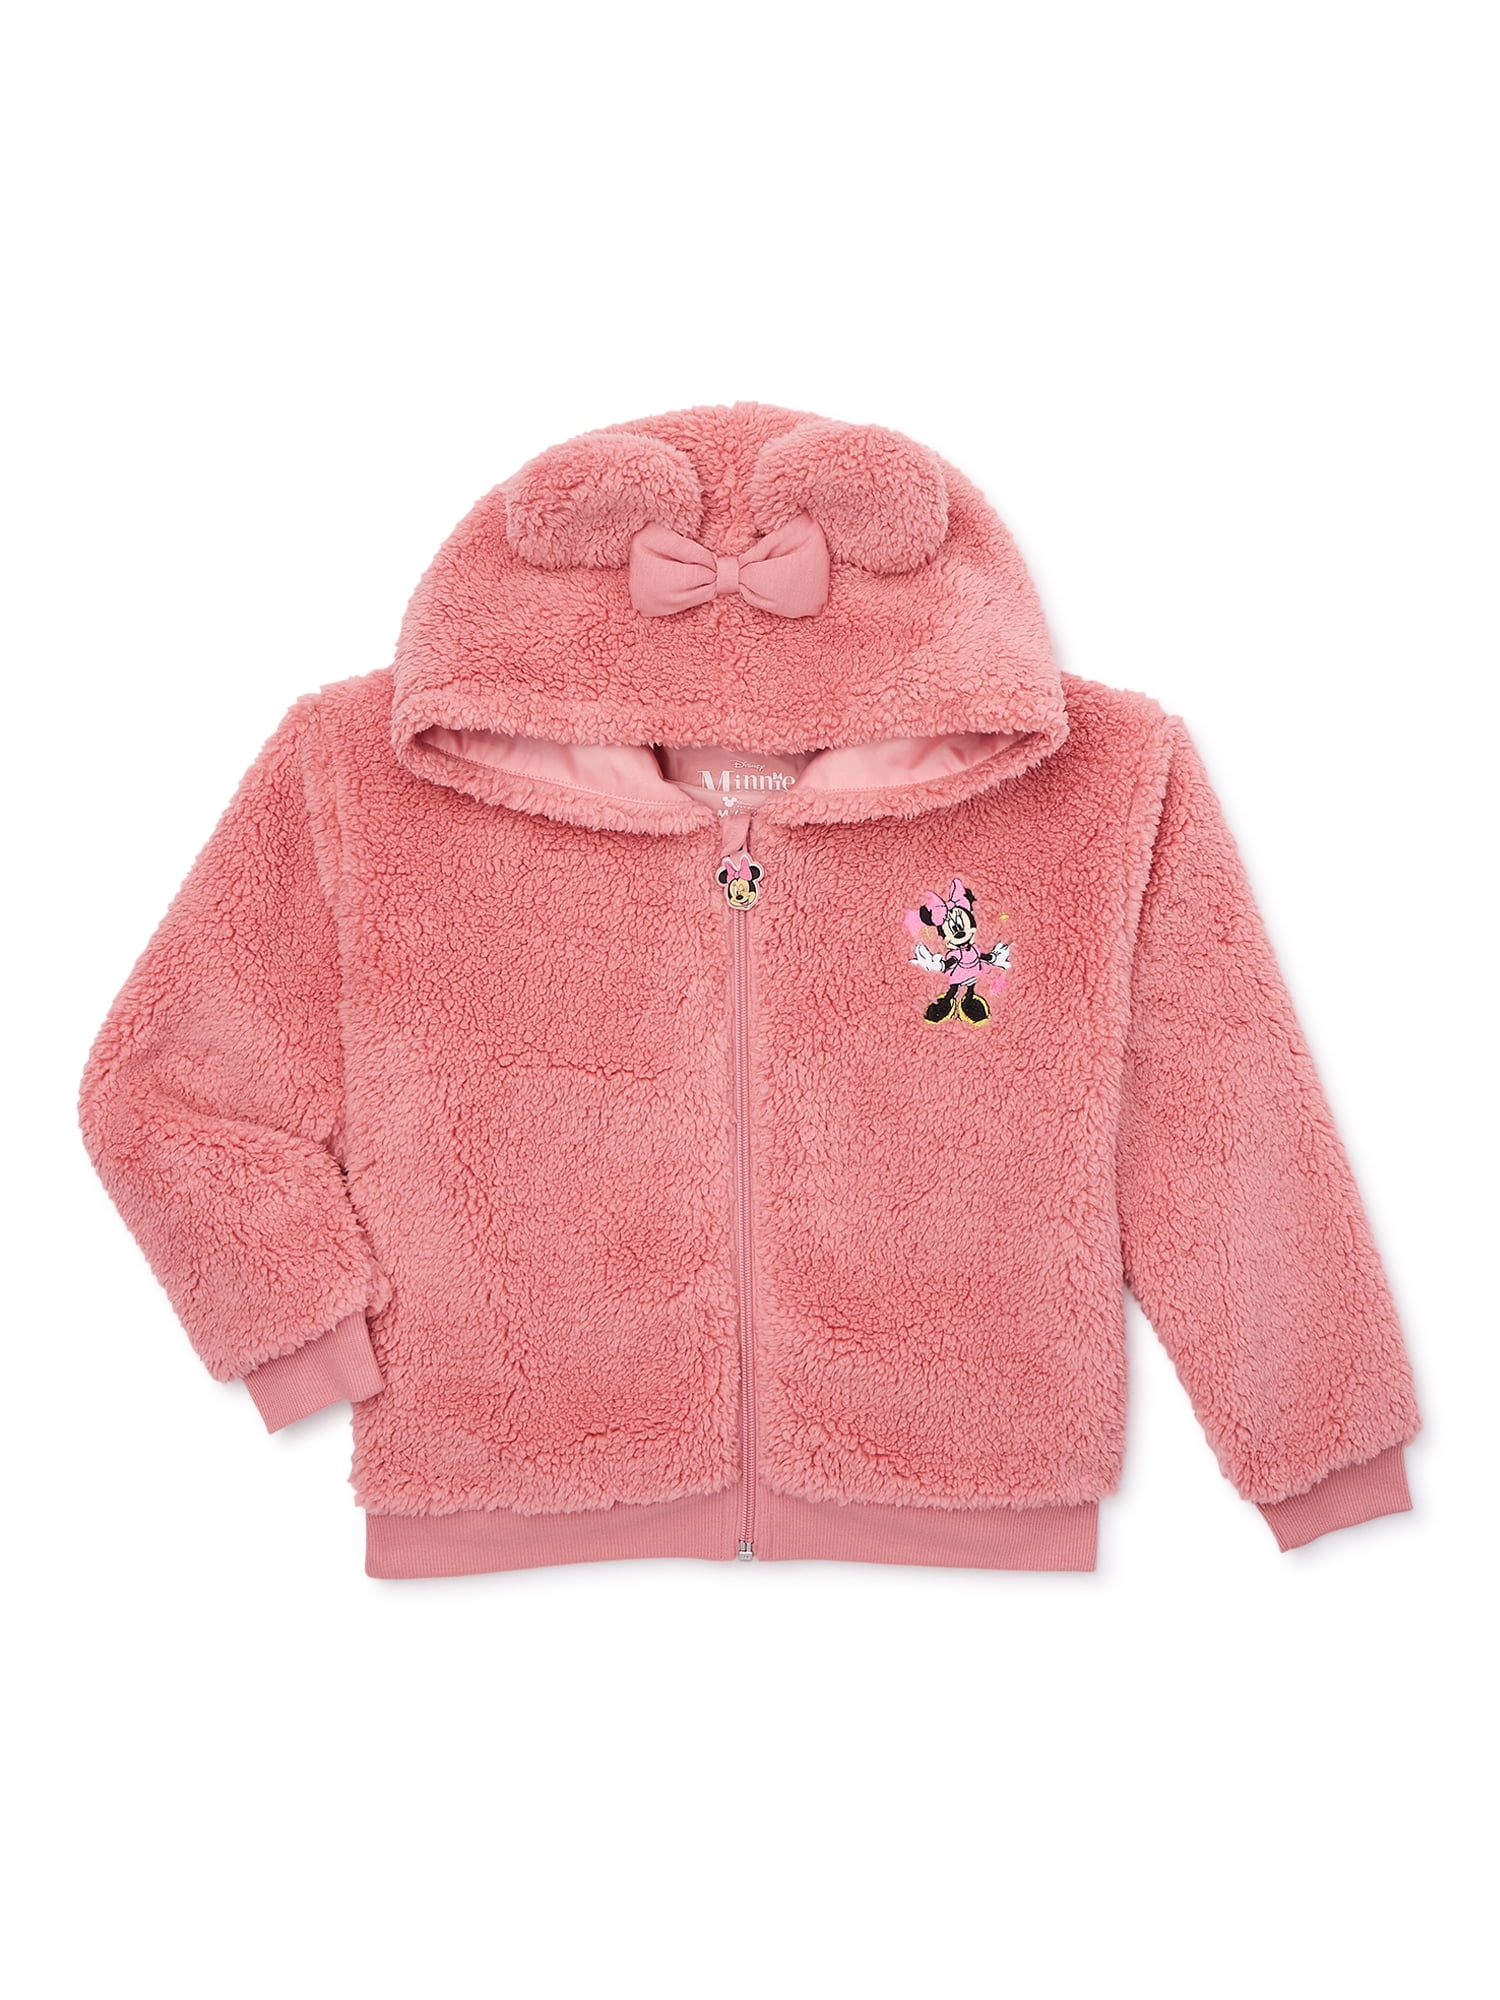 Disney Girls’ Minnie Mouse Faux Sherpa Zip-Up Hoodie, Sizes 4-16 ...